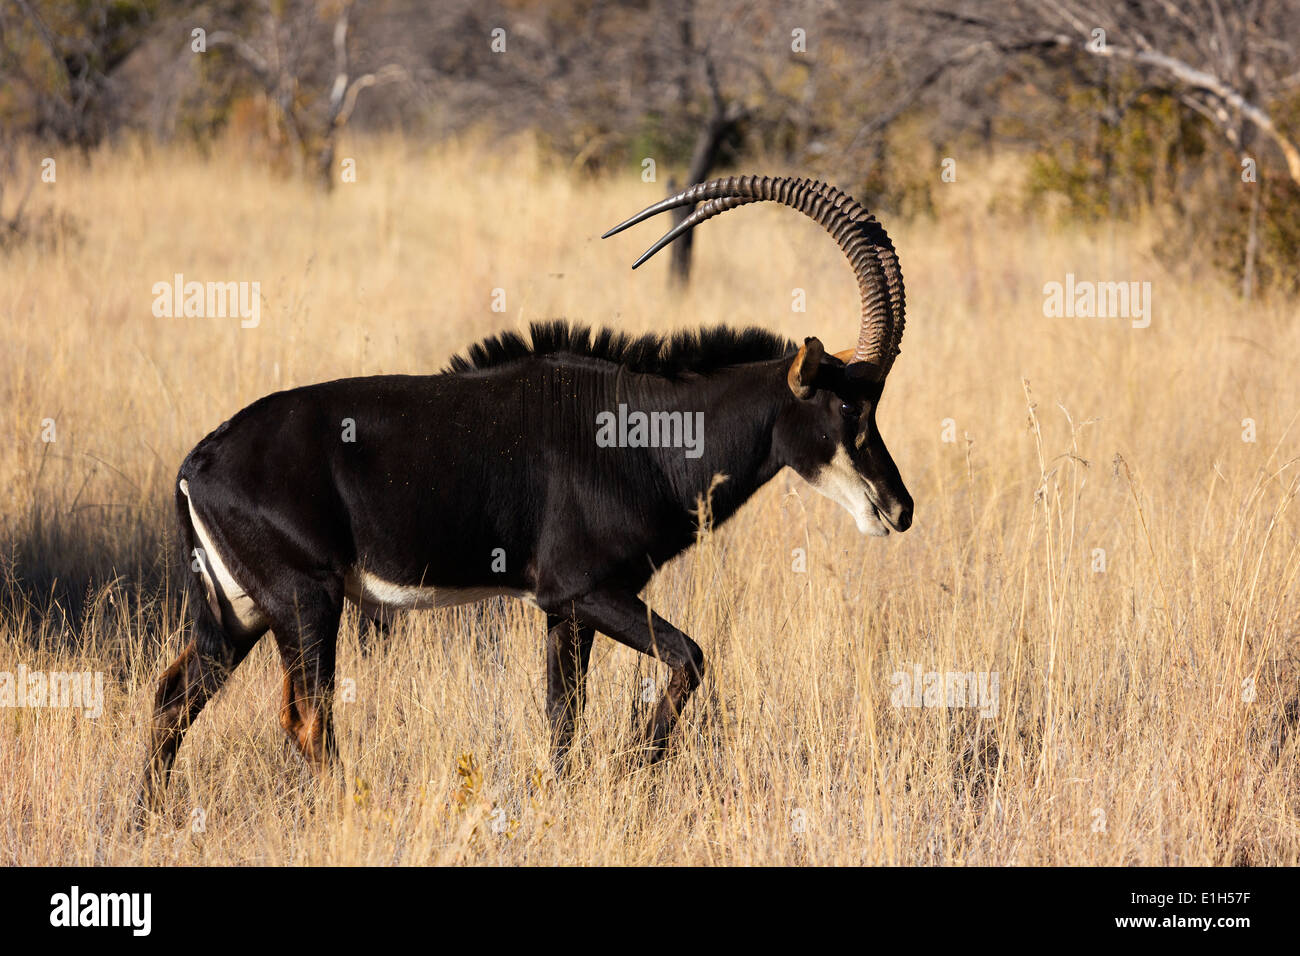 Sable antelope (Hippotragus niger), South Africa Stock Photo